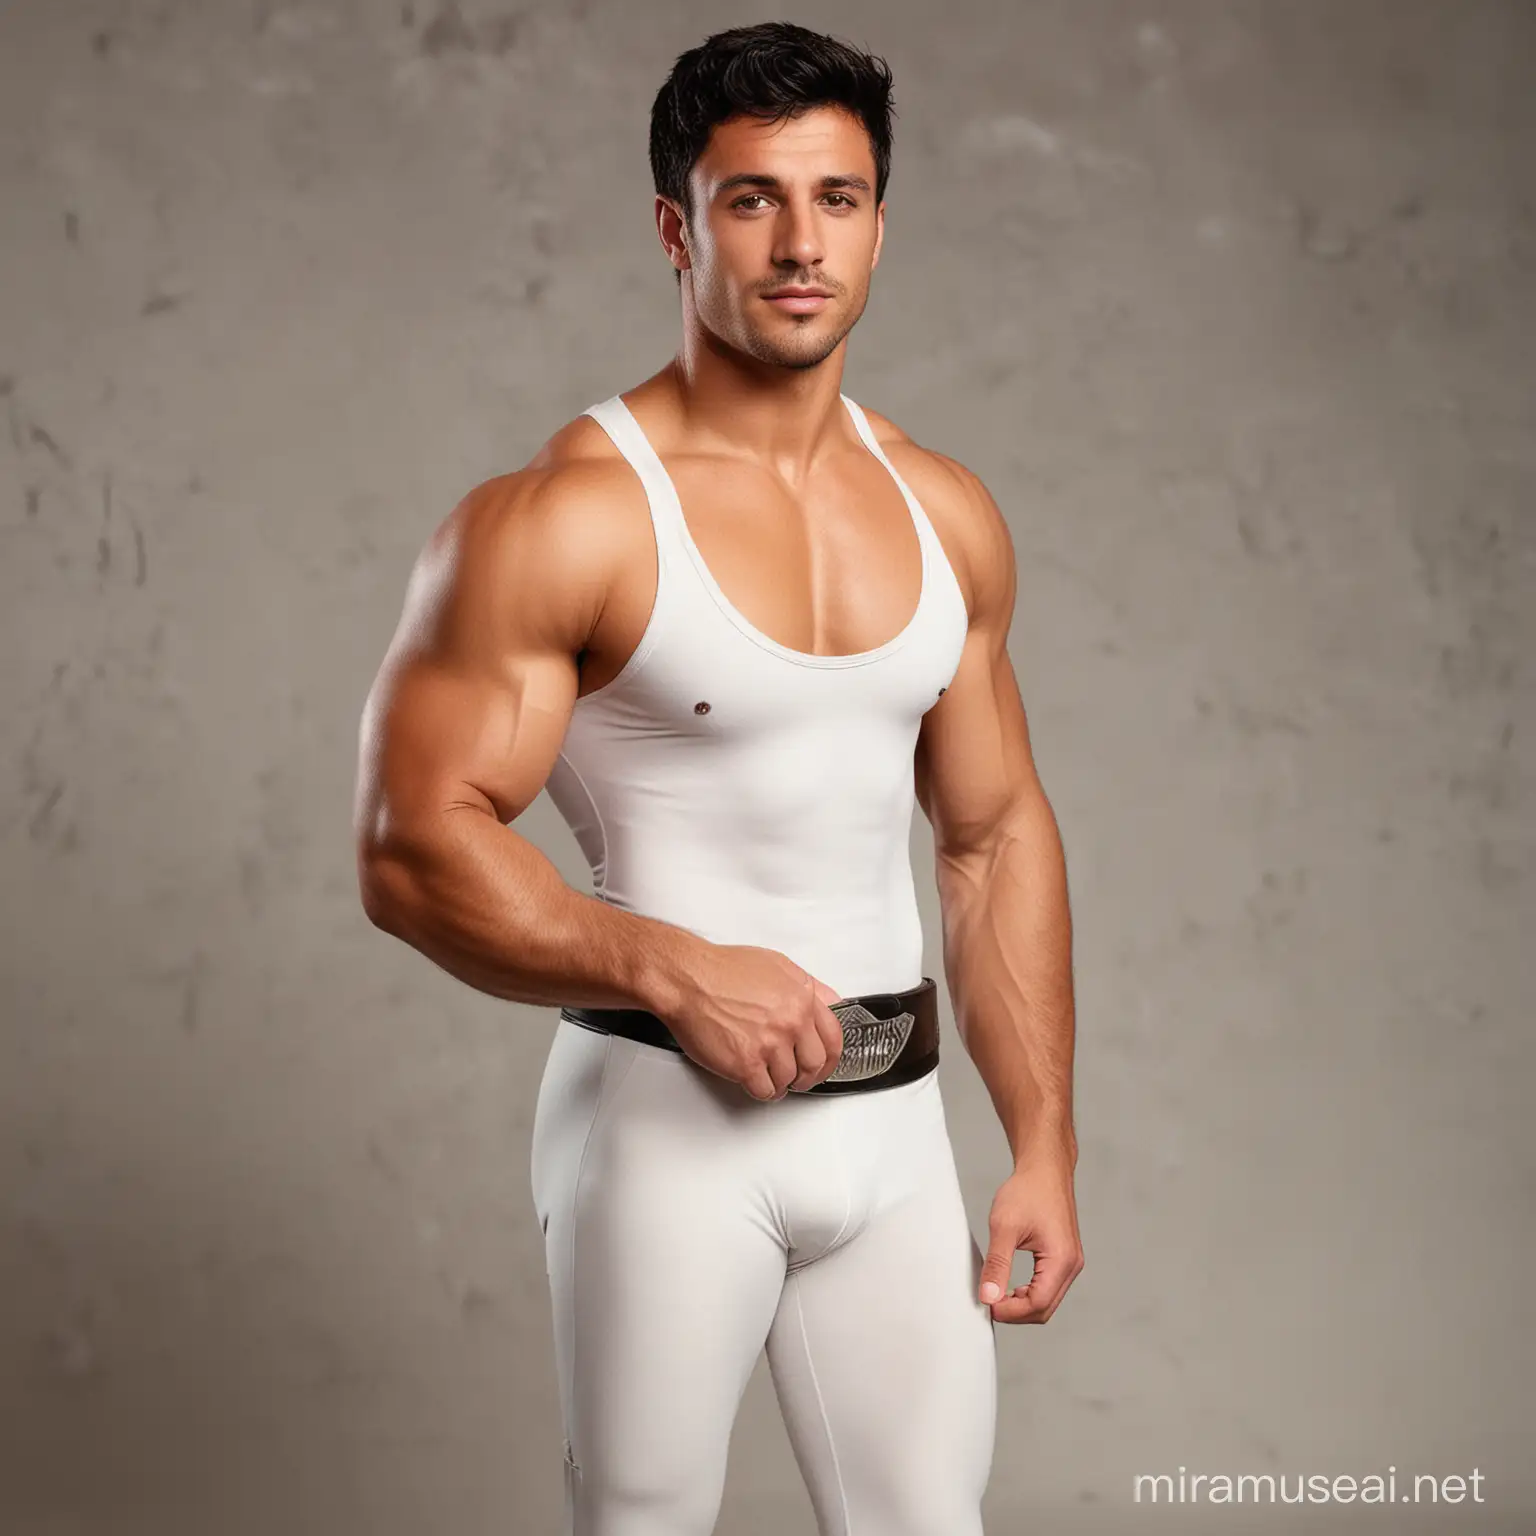 Autographed picture of handsome fit 27 year old Italian wrestler, with tan skin and short black hair, wearing long white spandex leggings; with championship belt, bare chest. 